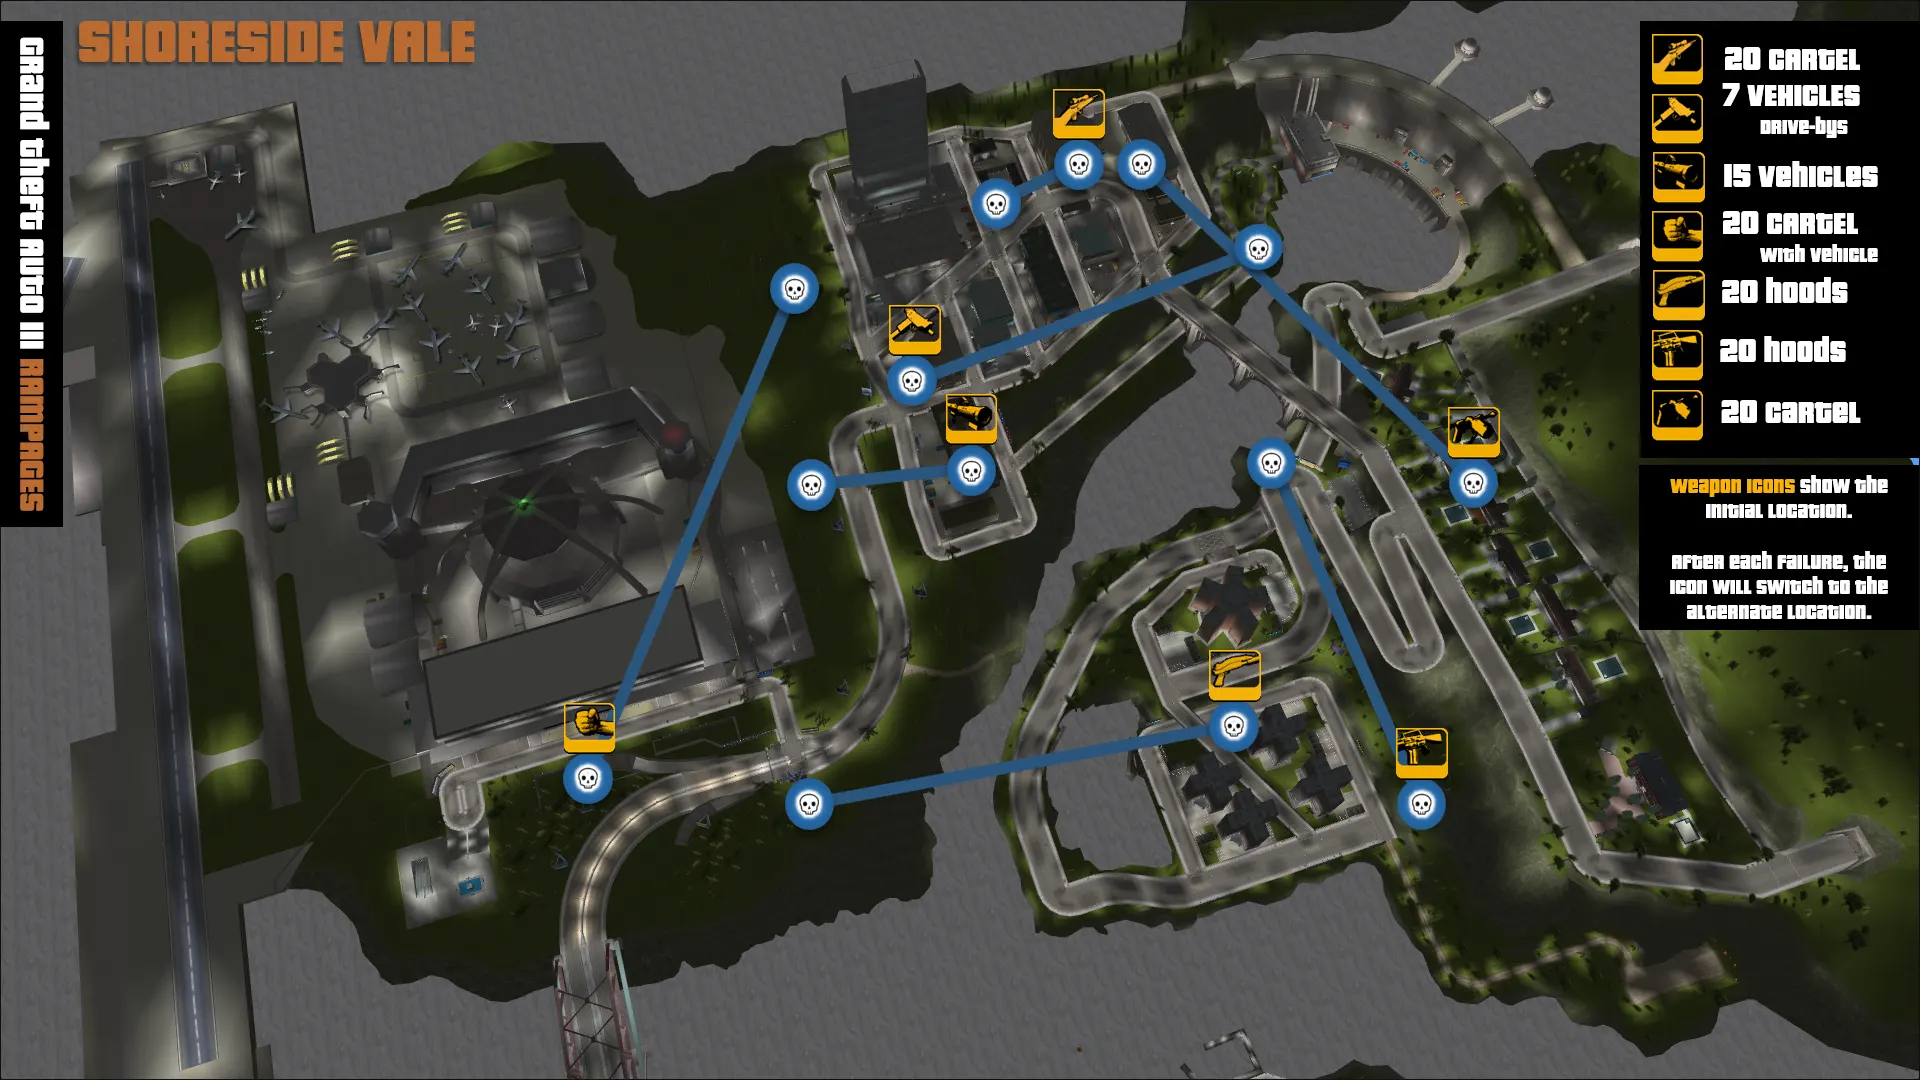 Grand Theft Auto III Shoreside Vale ramages map.